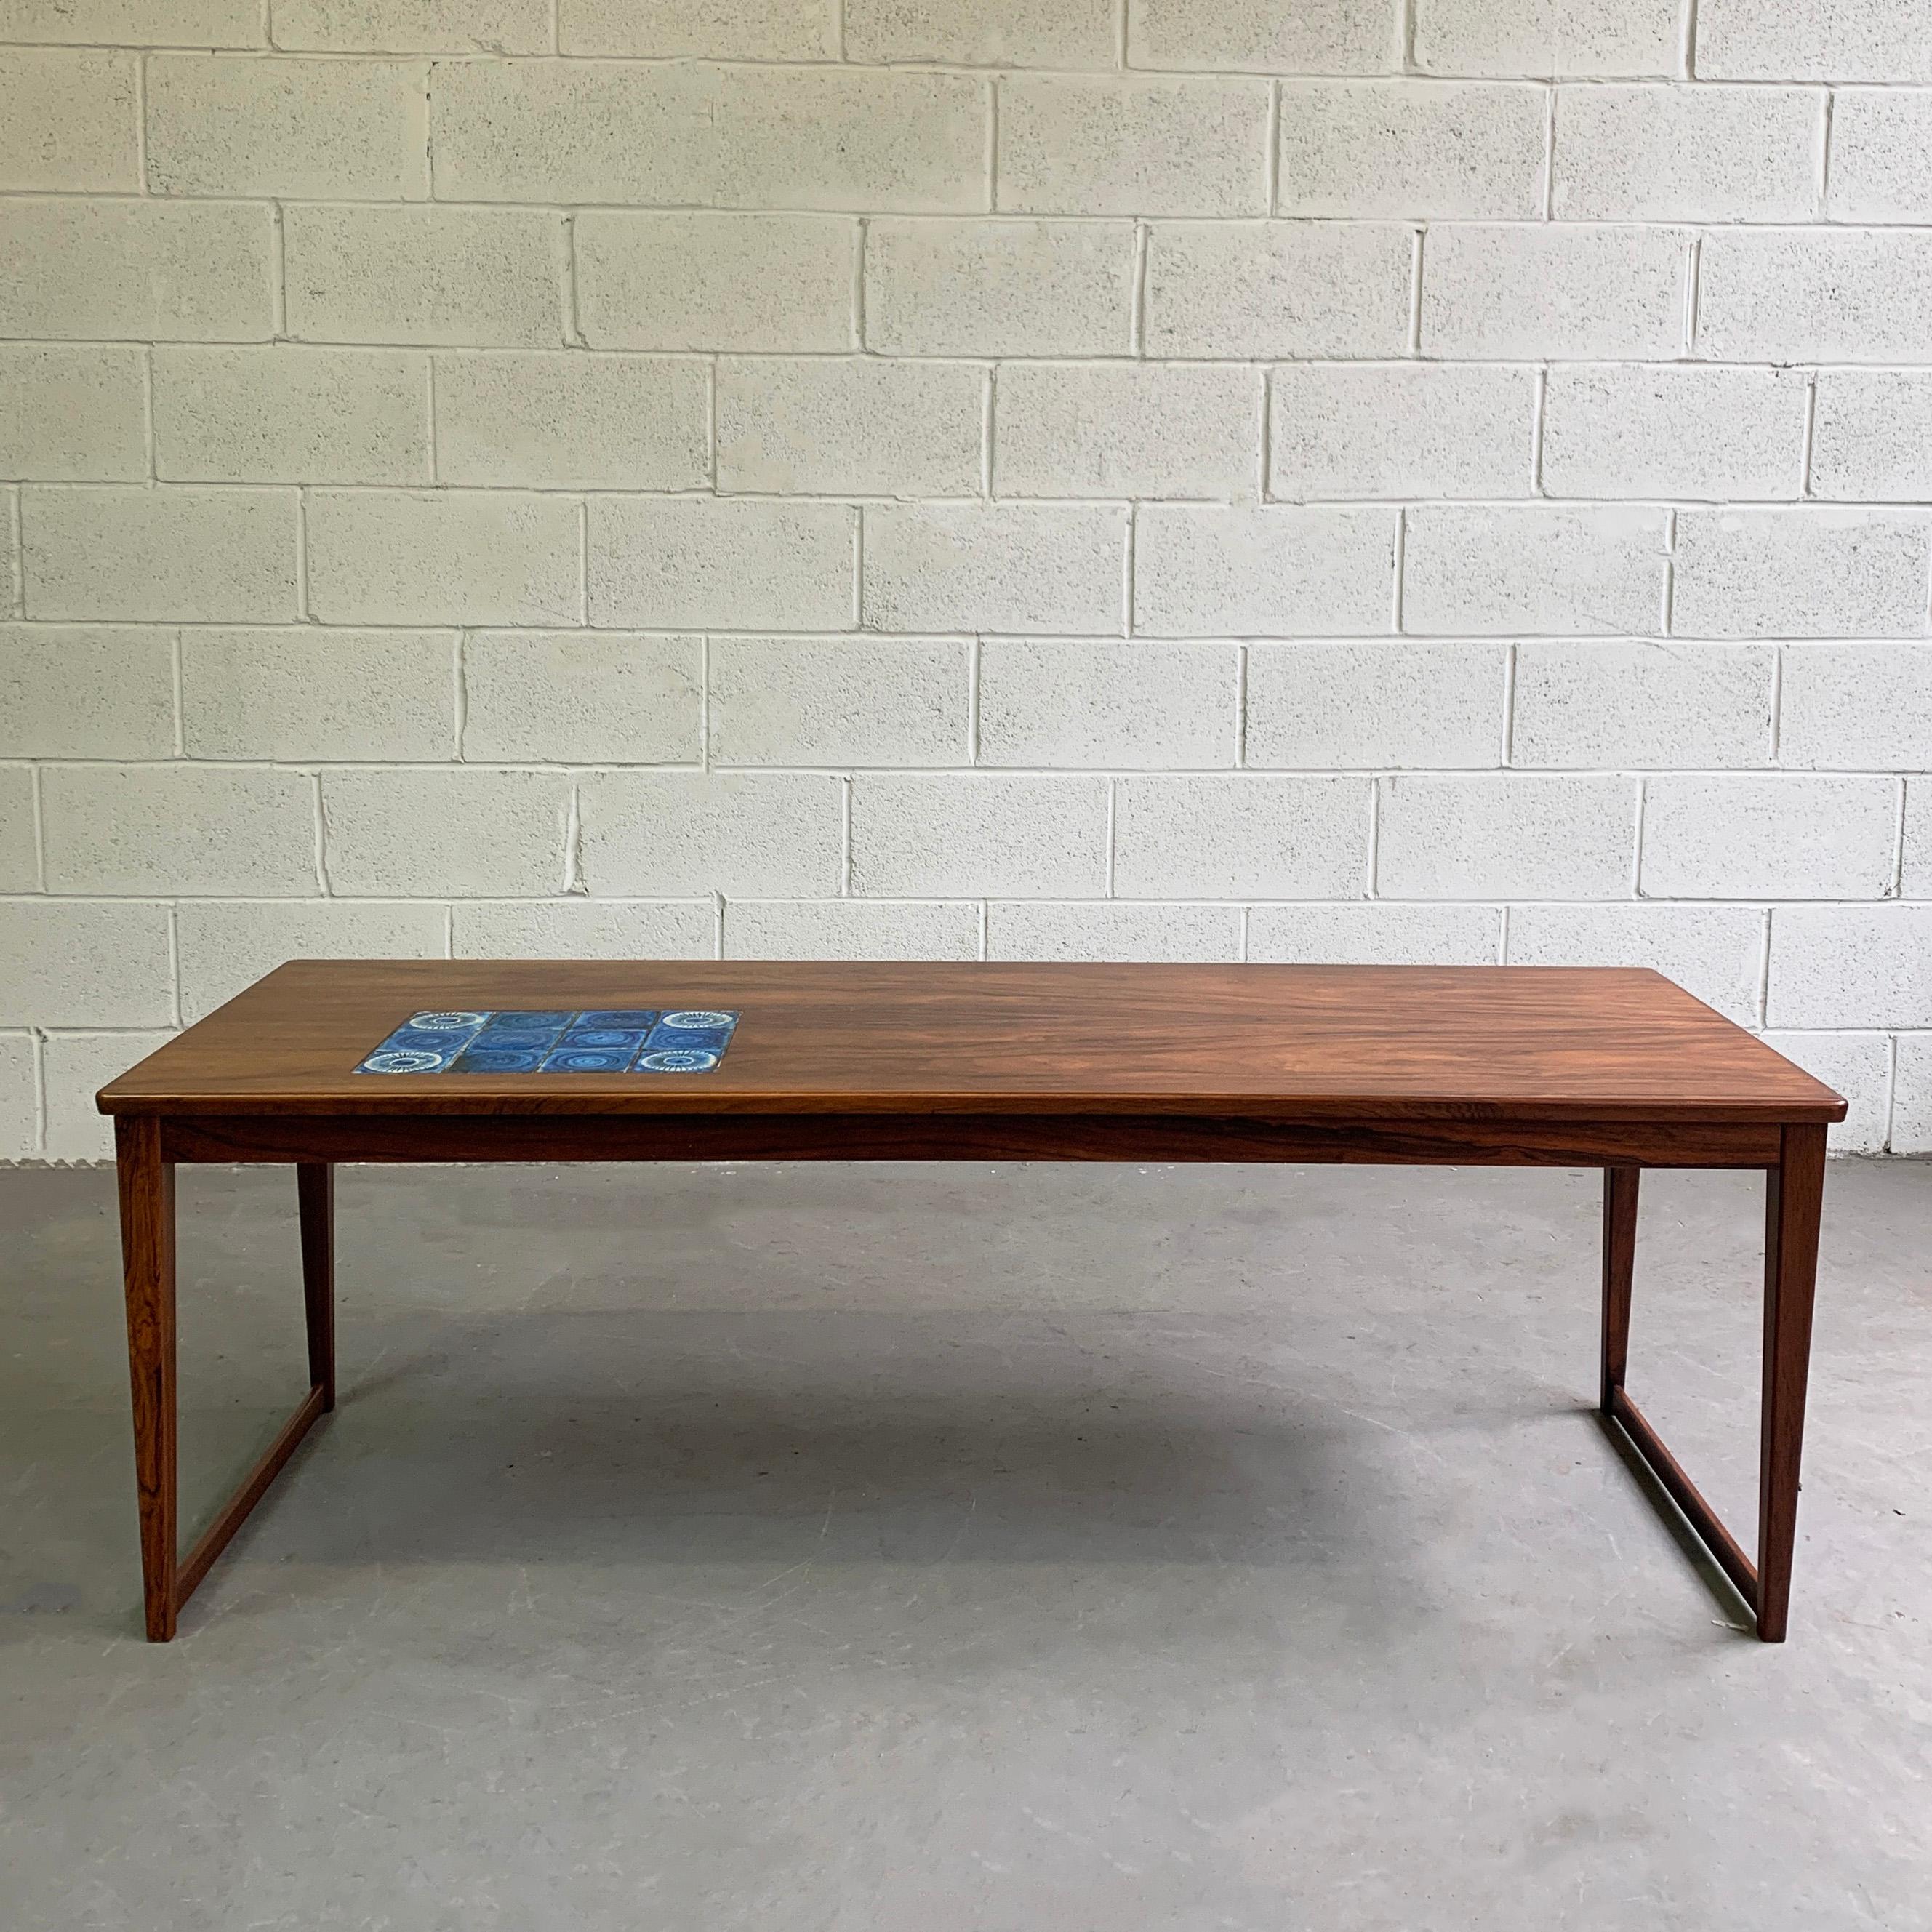 Danish modern, rosewood, coffee table features sleigh legs and a ceramic tile inlay reminiscent of Bitossi Rimini blue art pottery. Perfect as a high coffee table or low console table.